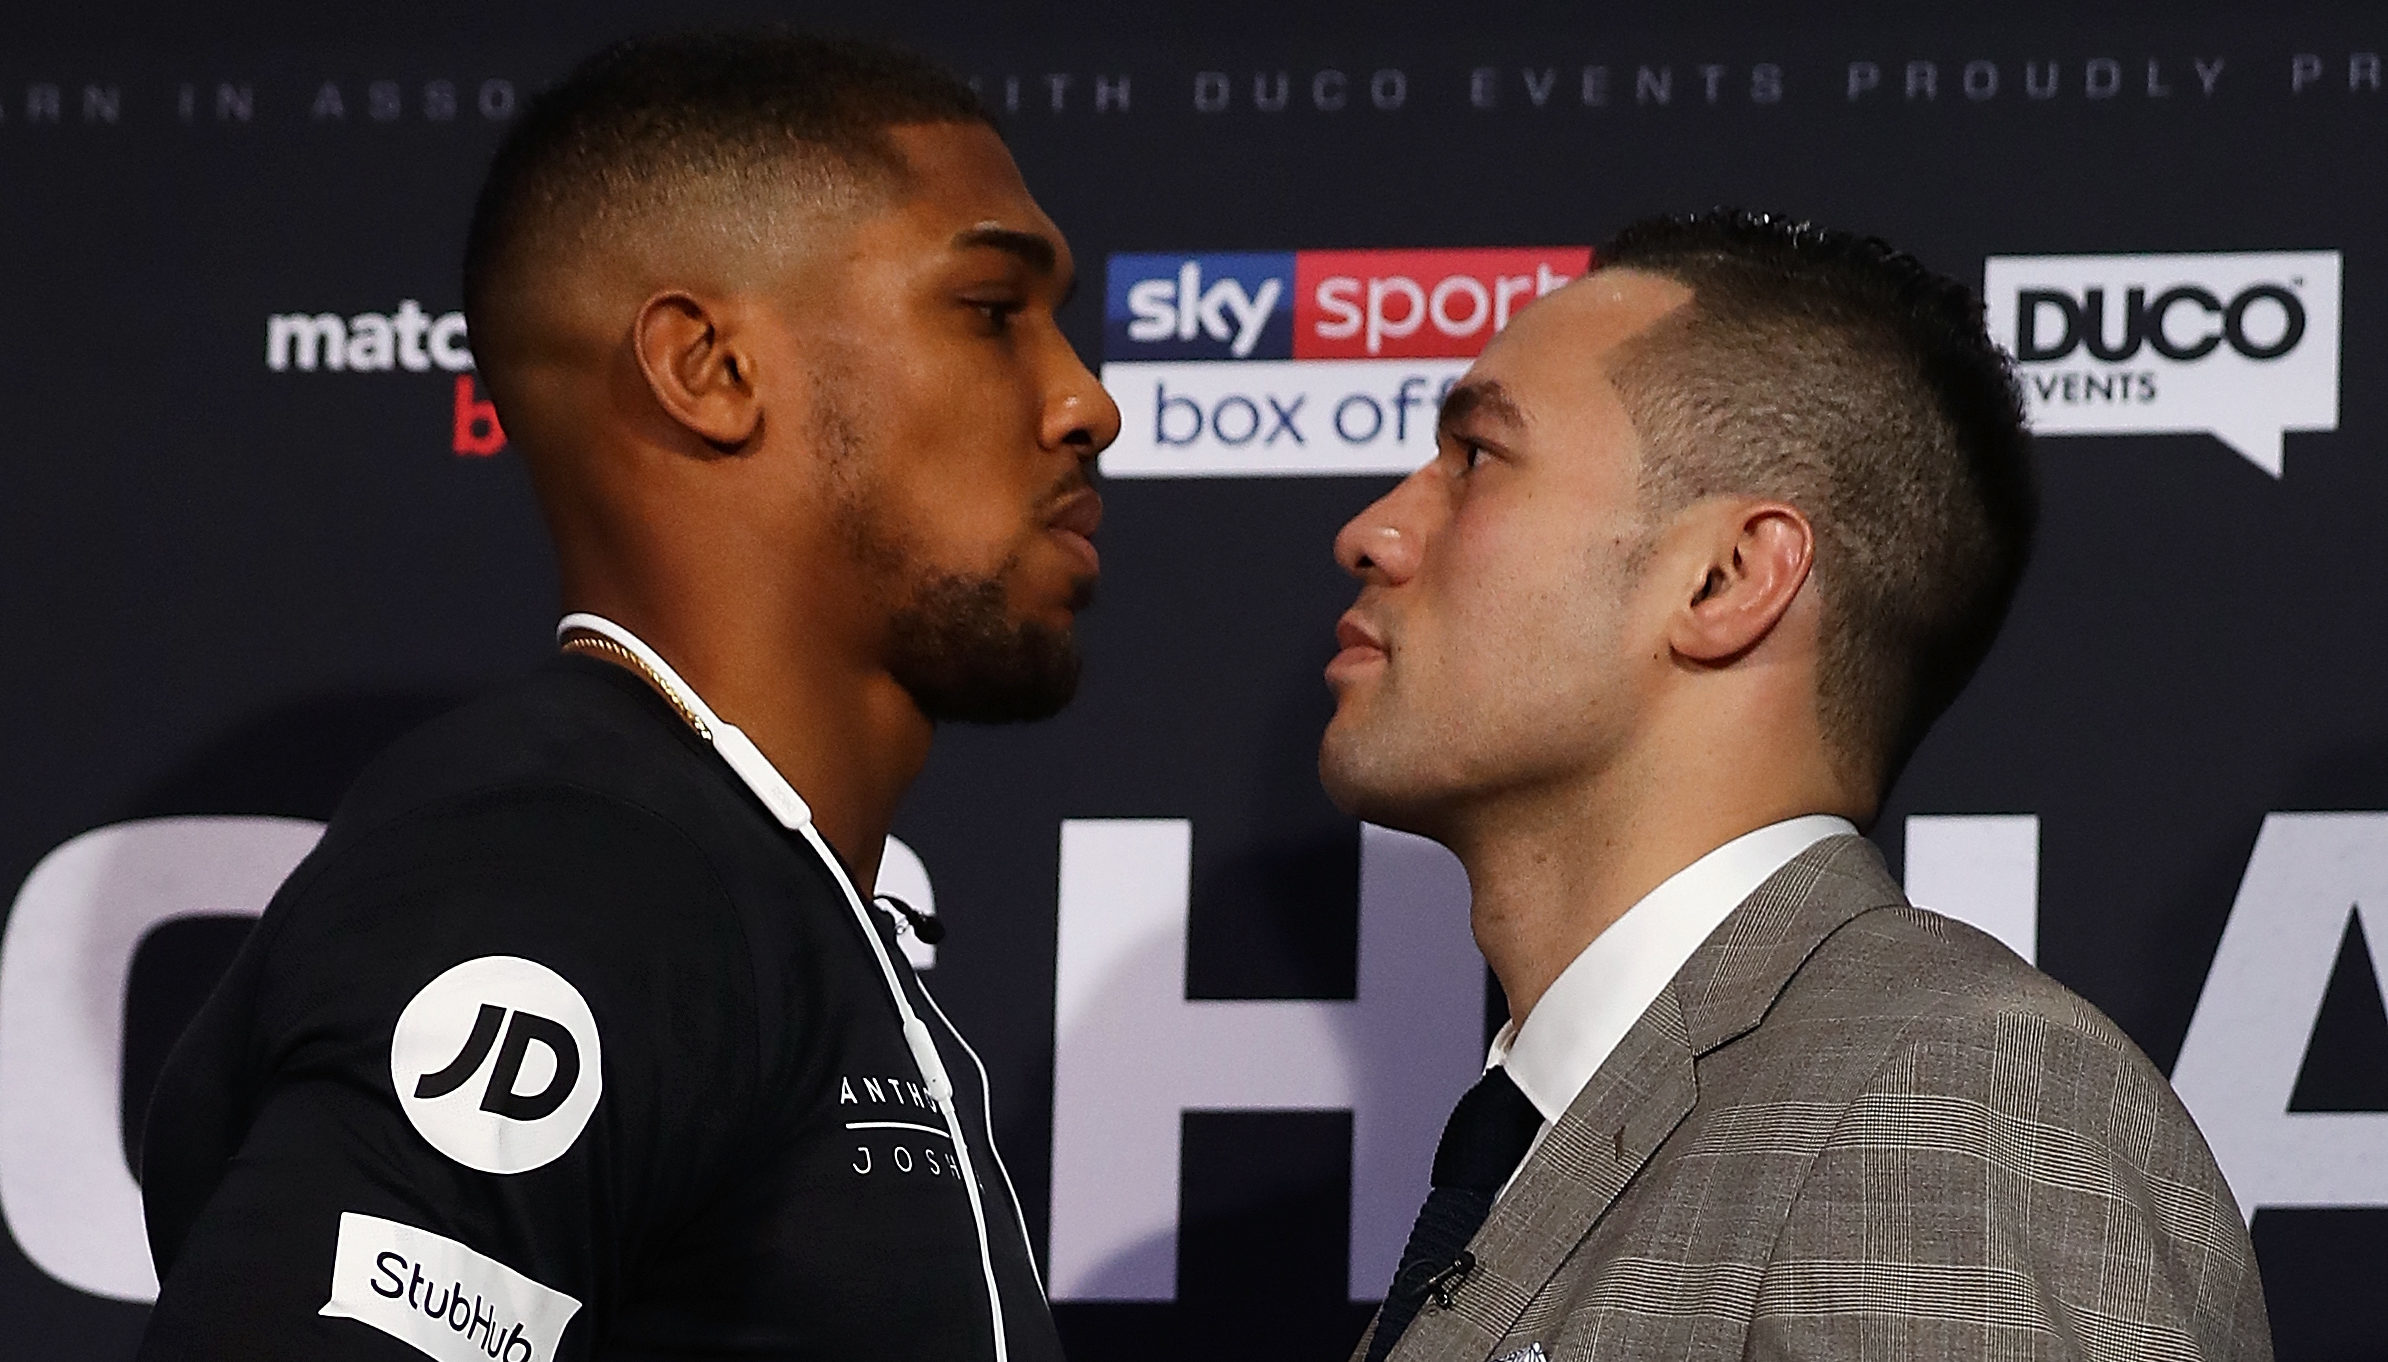 Anthony Joshua of Great Britain and Joseph Parker of New Zealand go head to head during a press conference (Bryn Lennon/Getty Images)